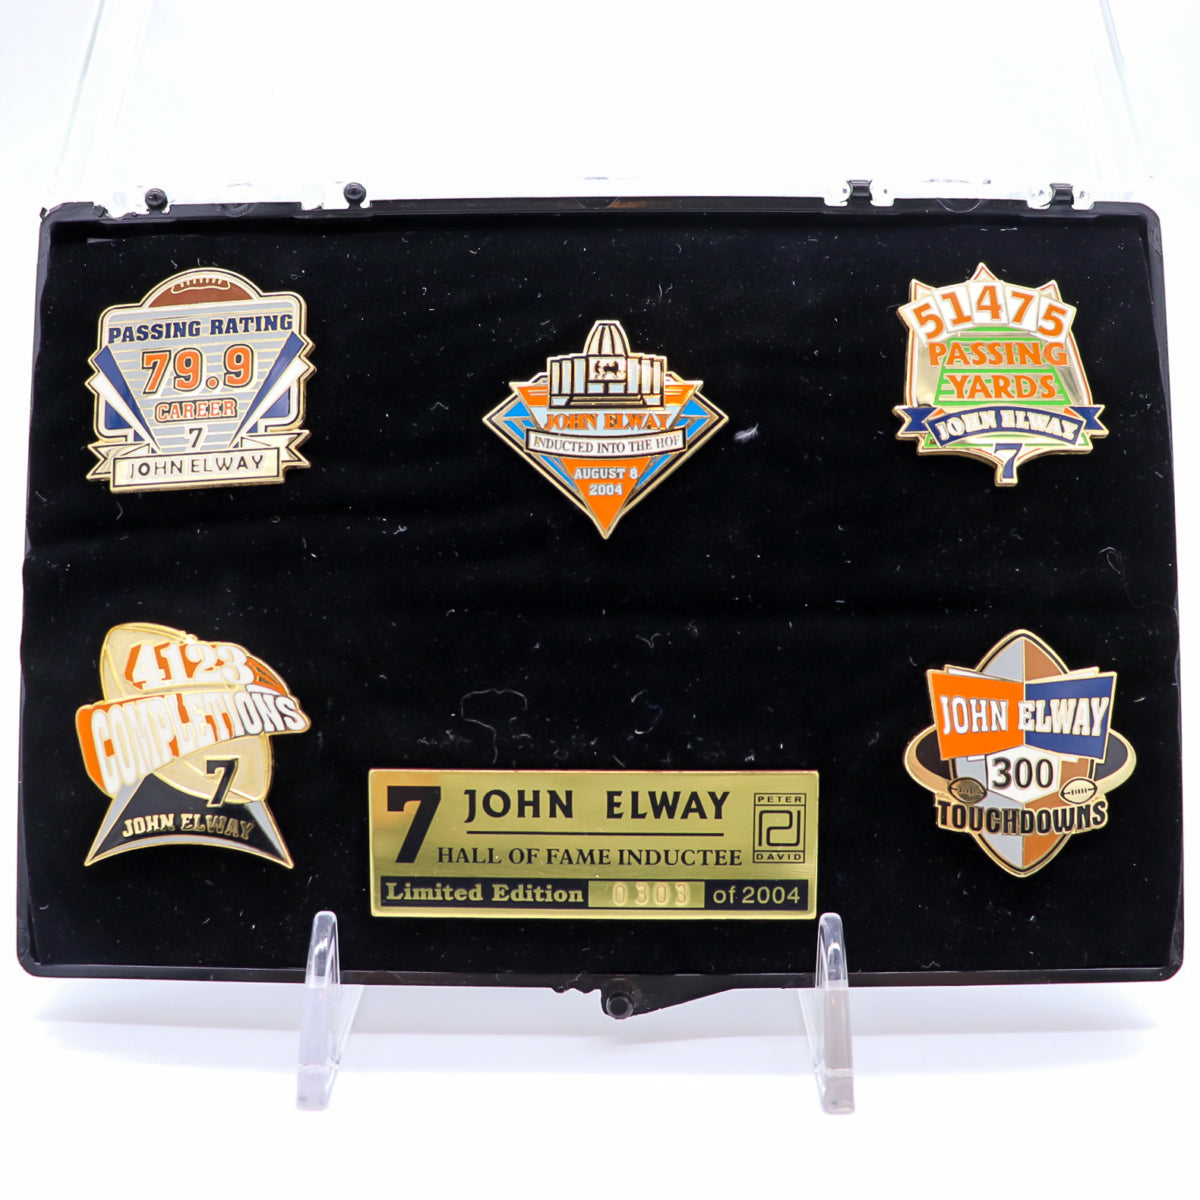 John Elway Hall of Fame Induction Limited Edition Commemorative Pin Set, #303/2004